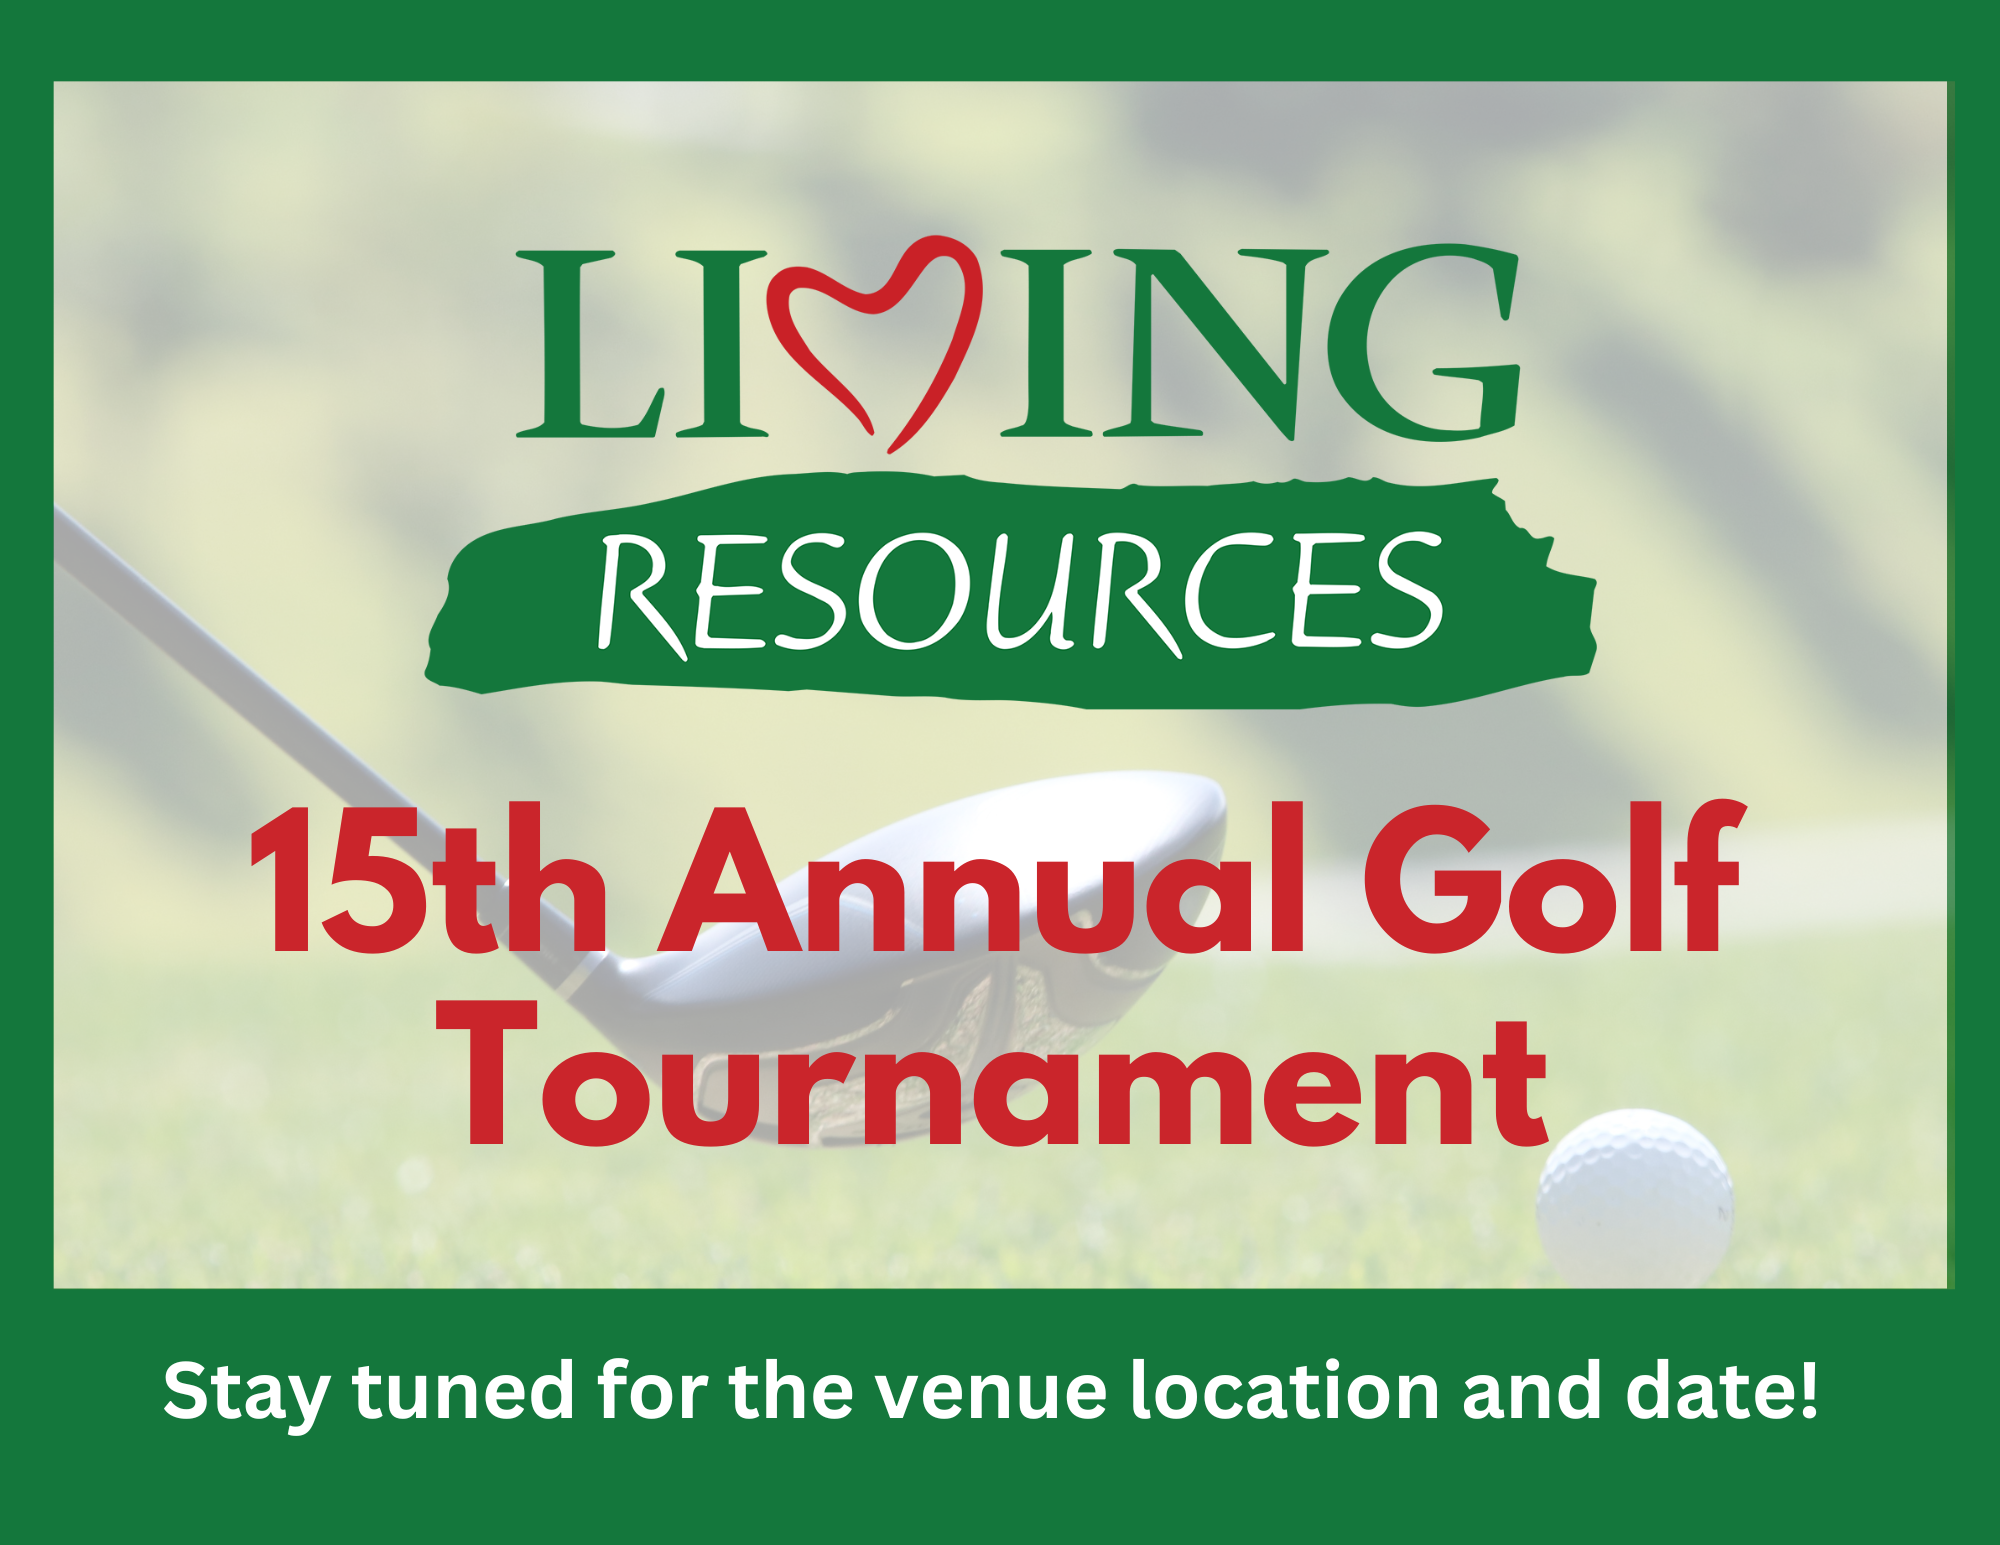 Living Resources' 14th Annual Golf Tournament